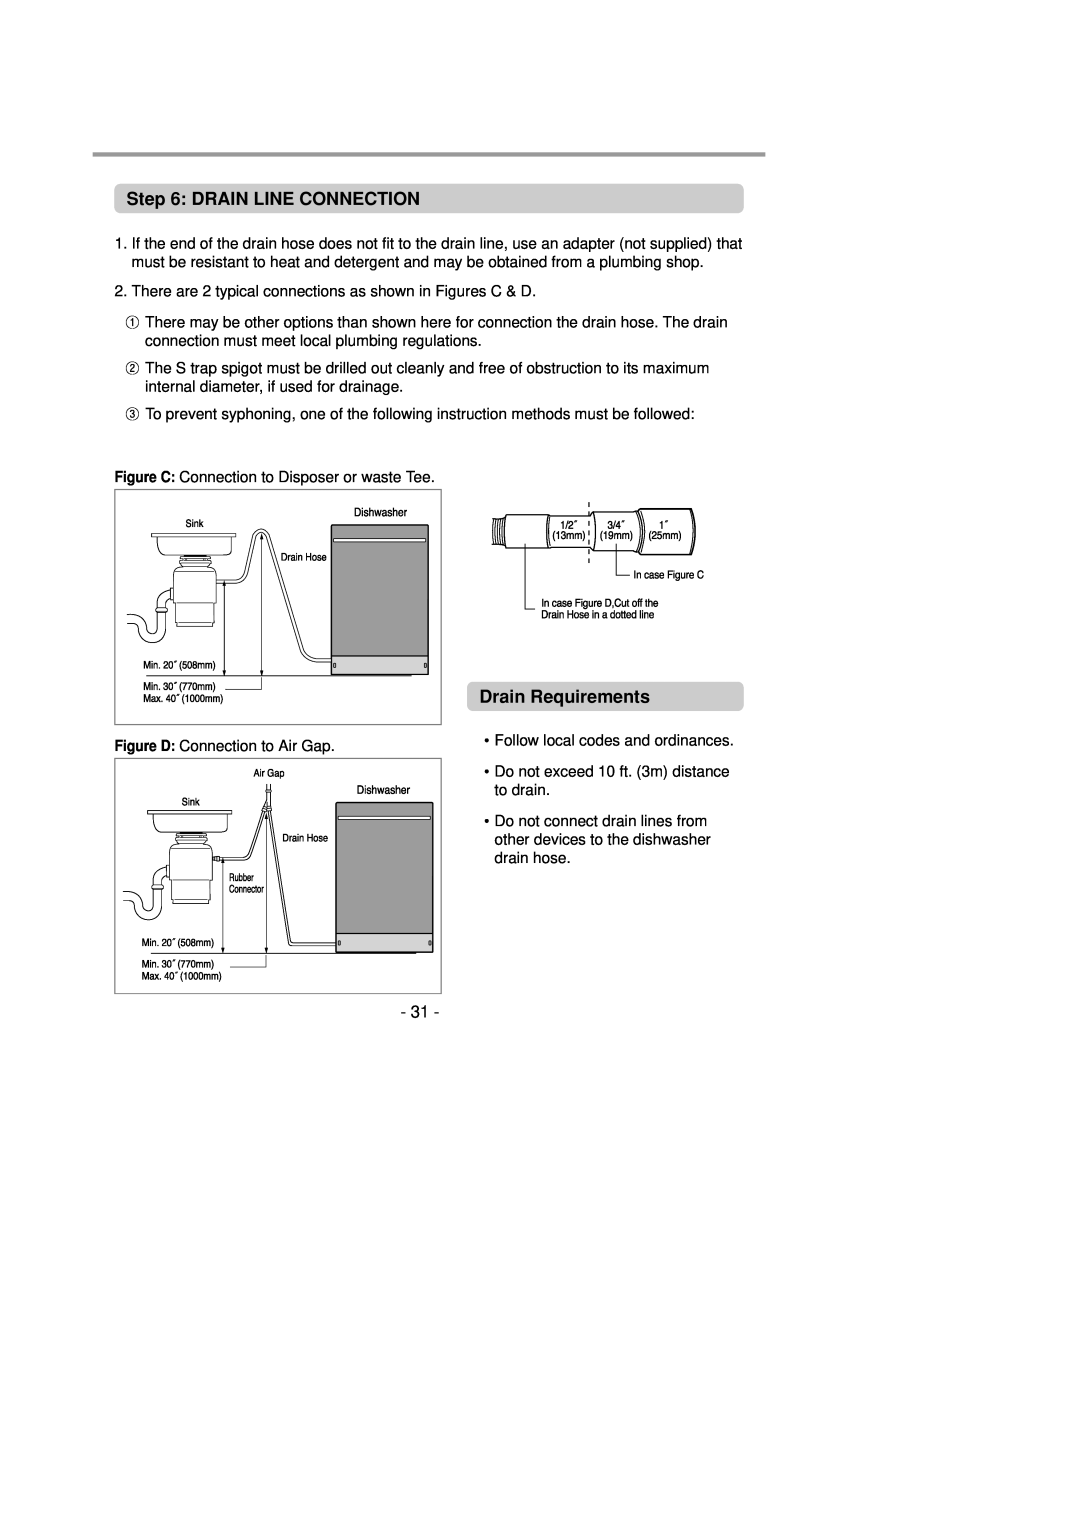 LG Electronics LDS4821(WW service manual Drain Line Connection, Drain Requirements 